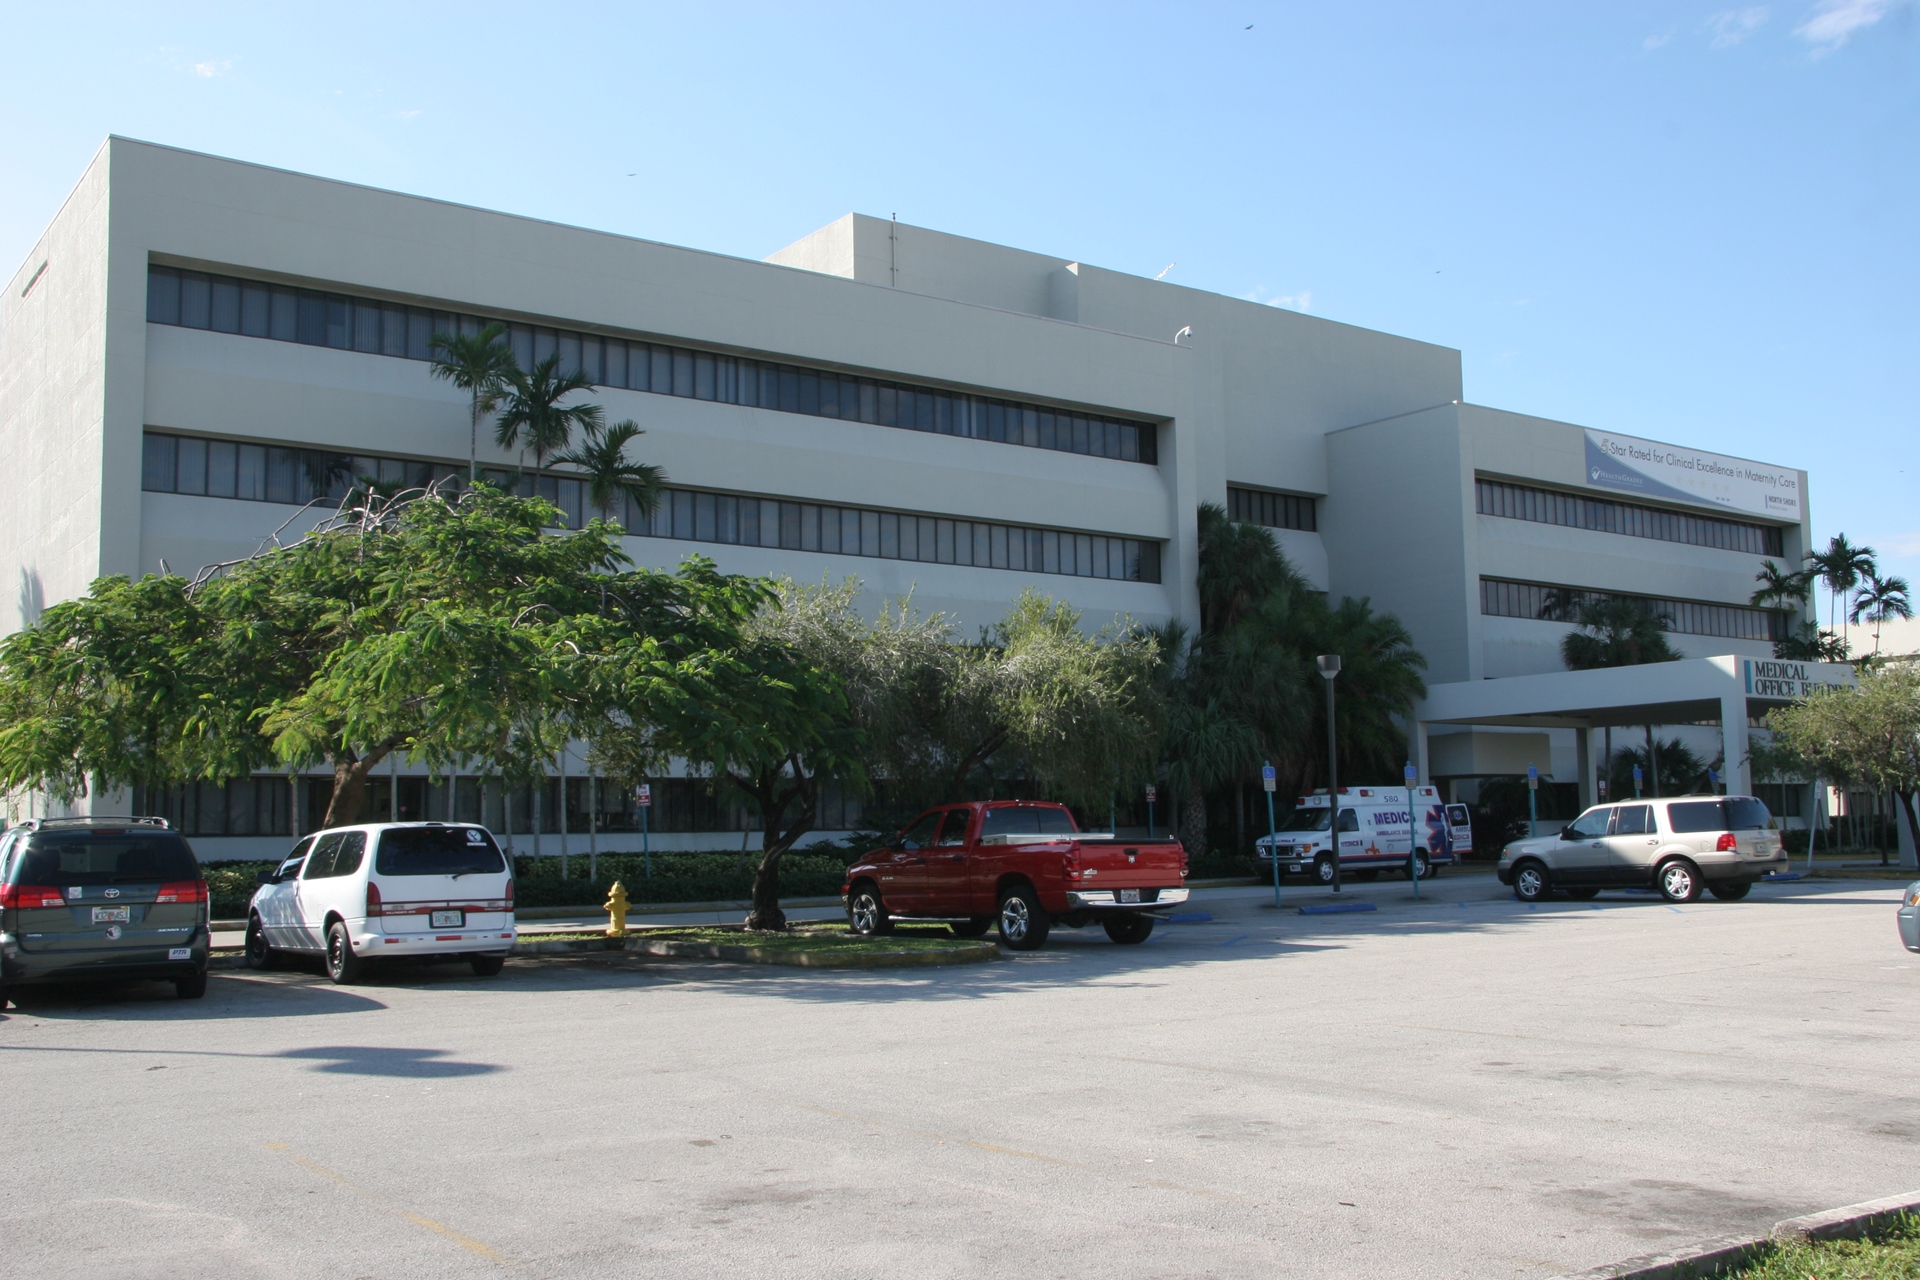 A Woman's Health Center - North Shore Hospital (medical building)